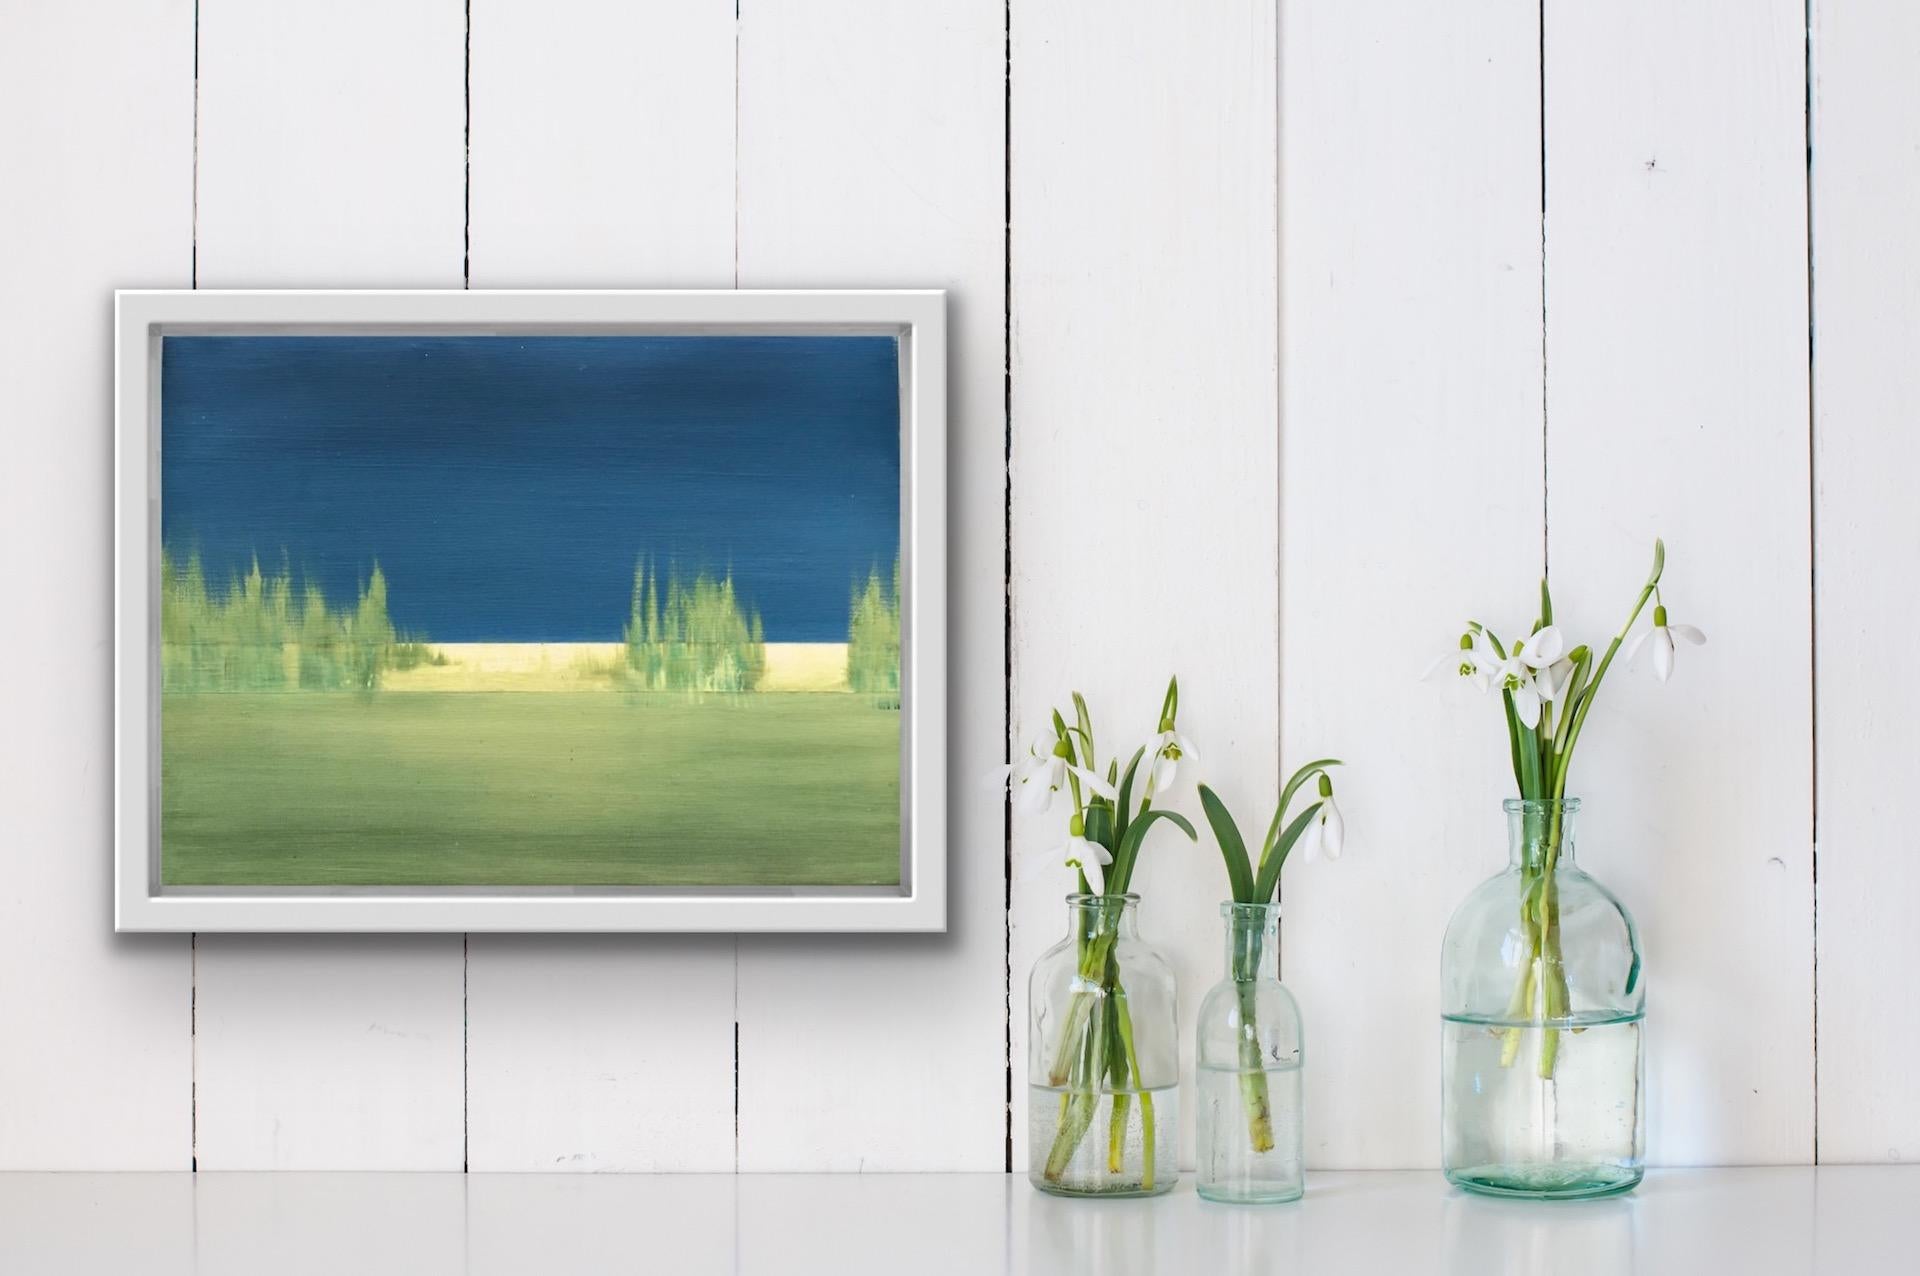 Emma Hartley
My Places 5
Original landscape painting
Oil on Linen
H30 W40 D2cm
(Please note that in situ images are purely an indication of how a piece may look).

This original oil painting by Emma Hartley is inspired by the light between night and